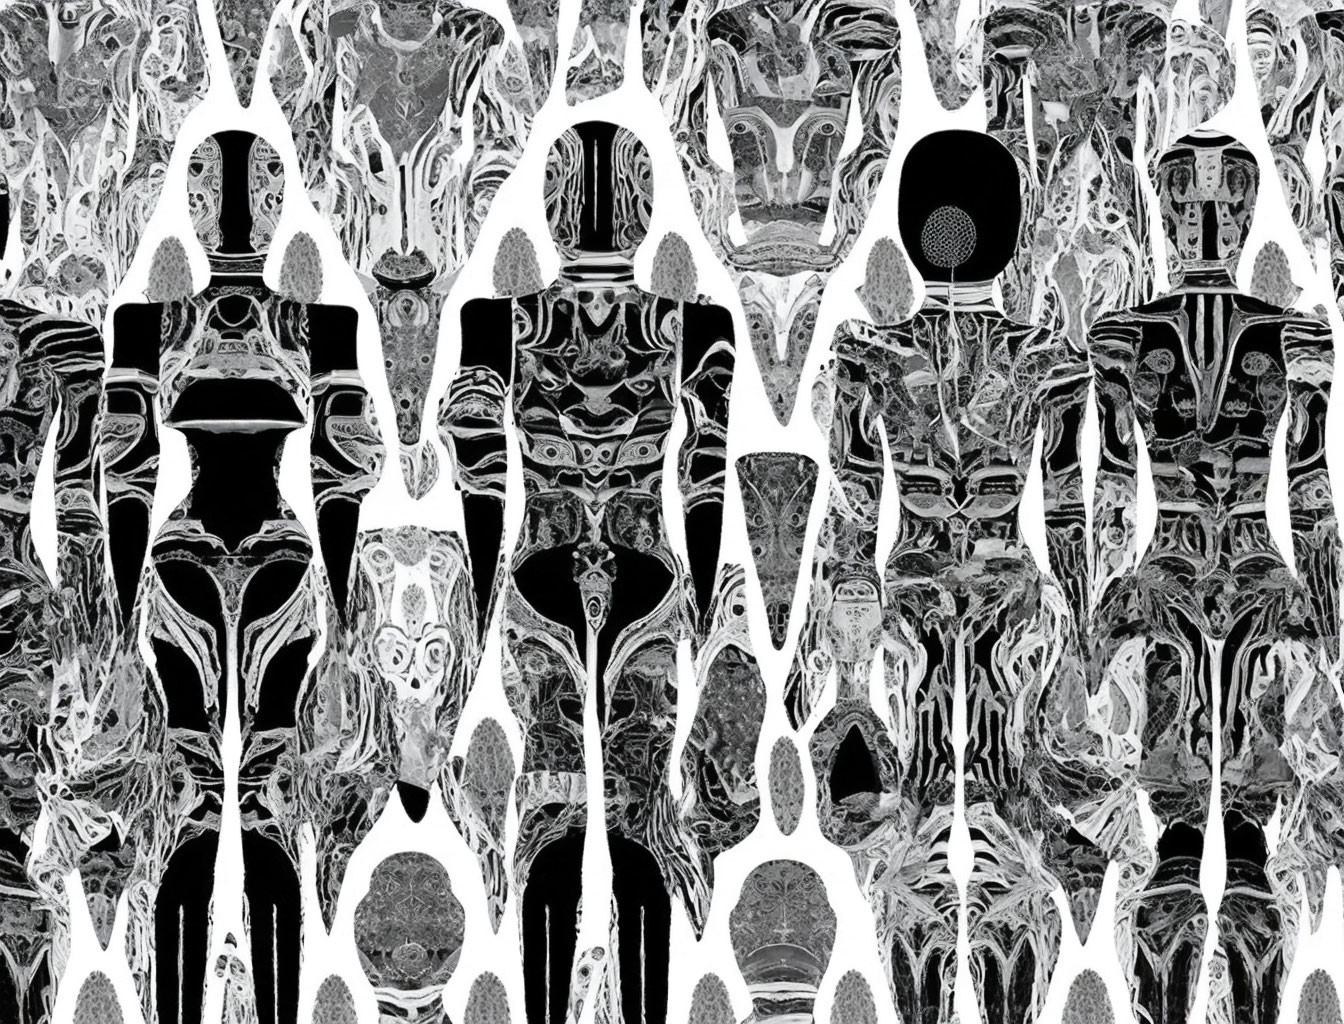 Monochromatic abstract image of silhouetted figures with intricate patterns